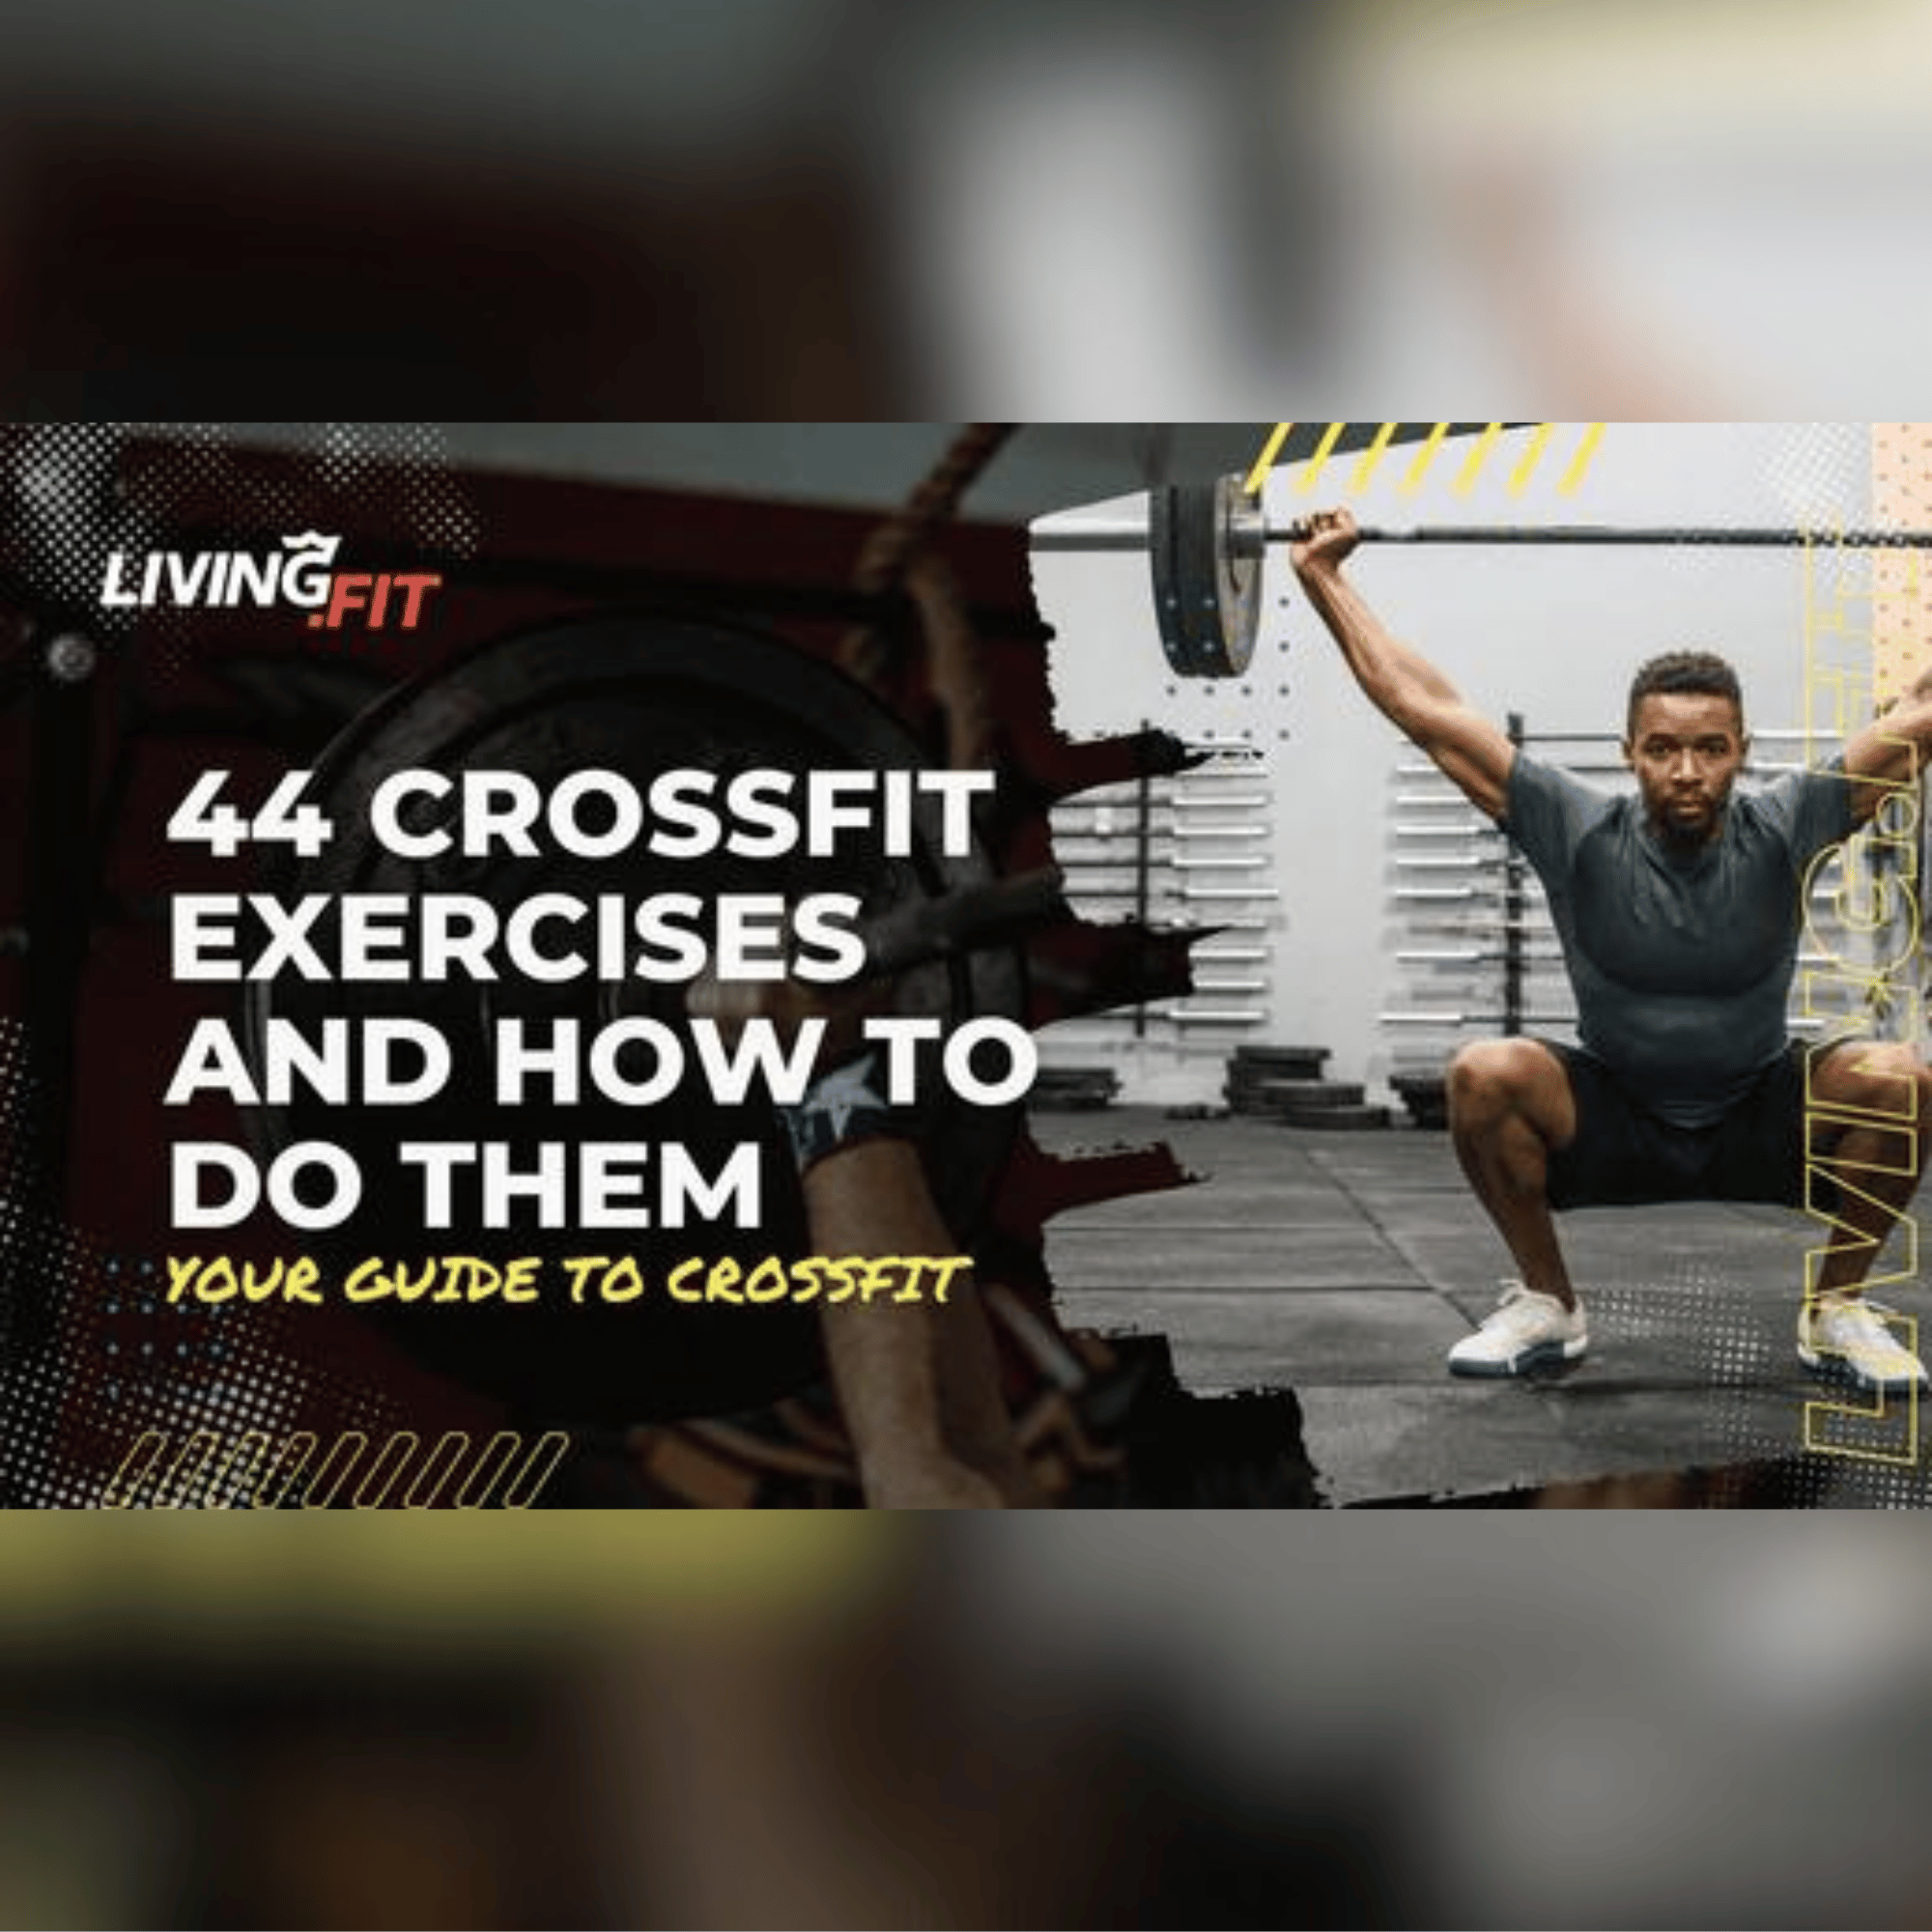 44 Crossfit Workouts Demonstrated, Your Guide to Crossfit Workouts –